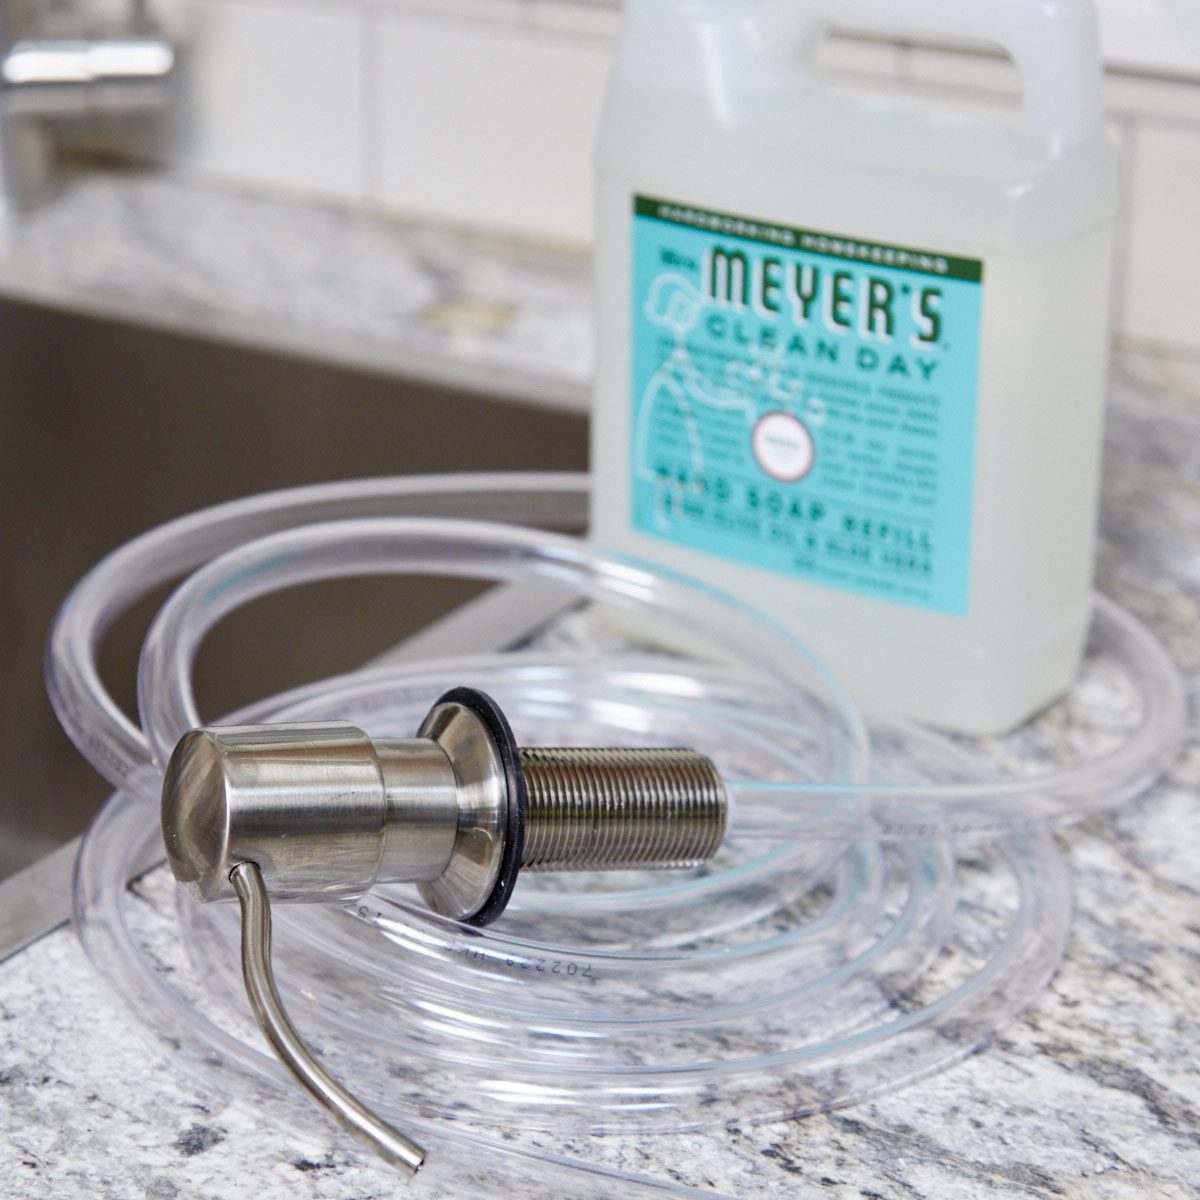 Making Cleanup Fast With An Organized Kitchen Sink & DIY Soap Dispenser